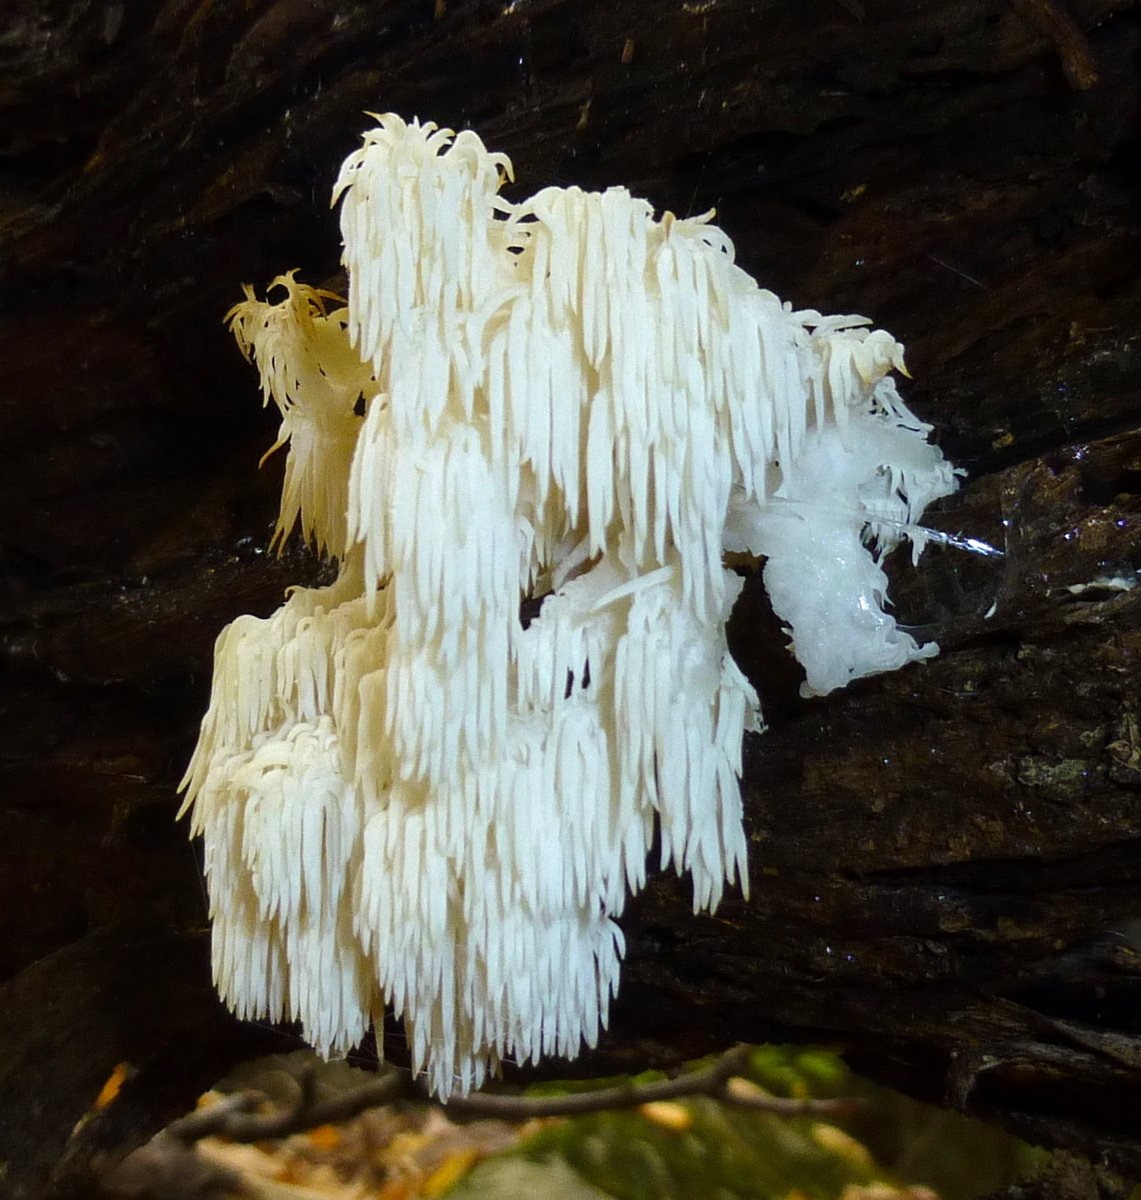 5. Toothed Fungus